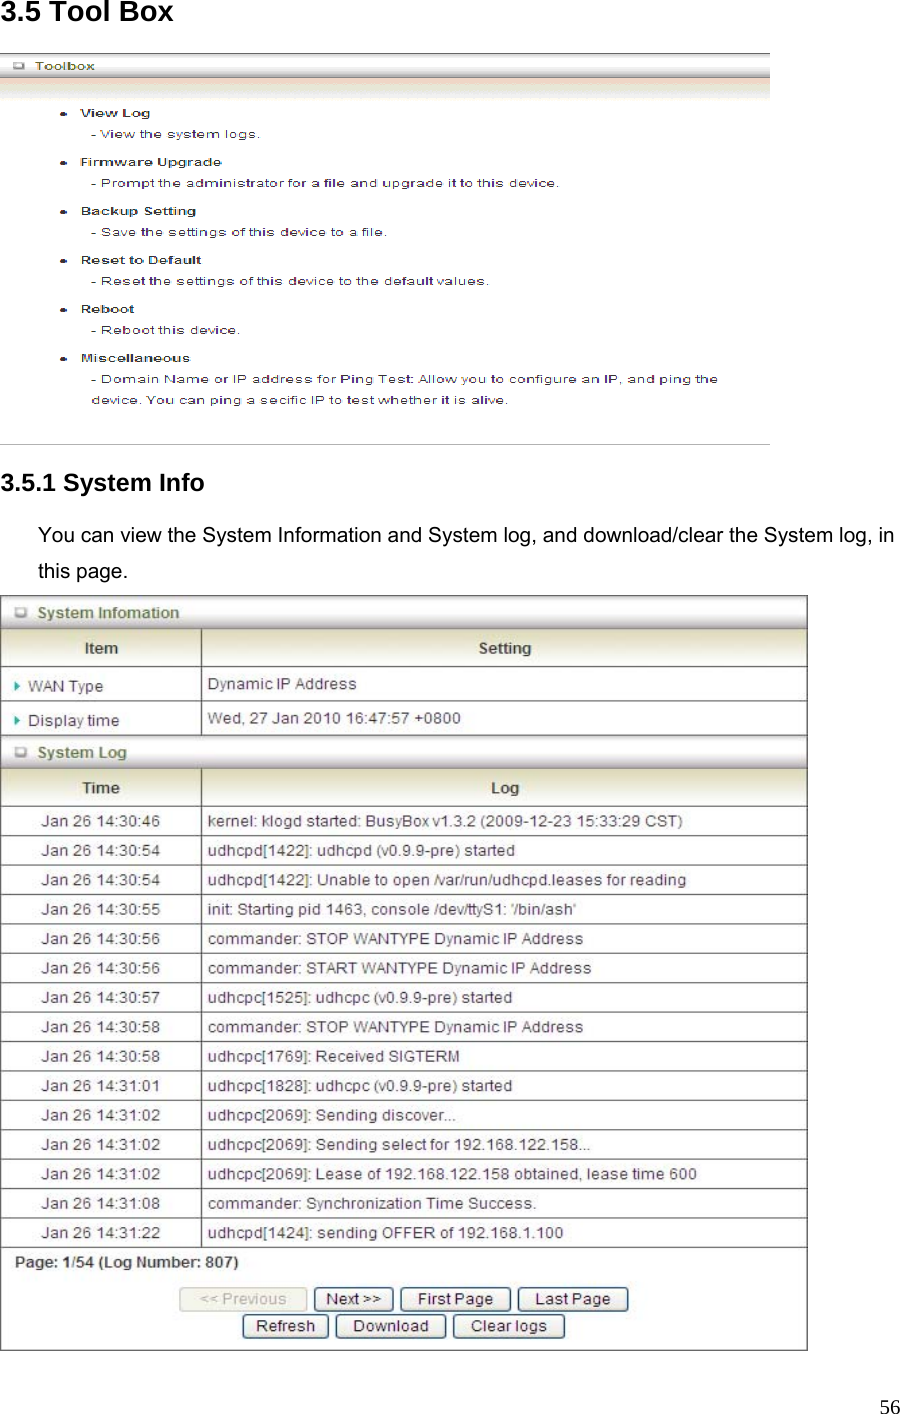  563.5 Tool Box    3.5.1 System Info  You can view the System Information and System log, and download/clear the System log, in this page.  